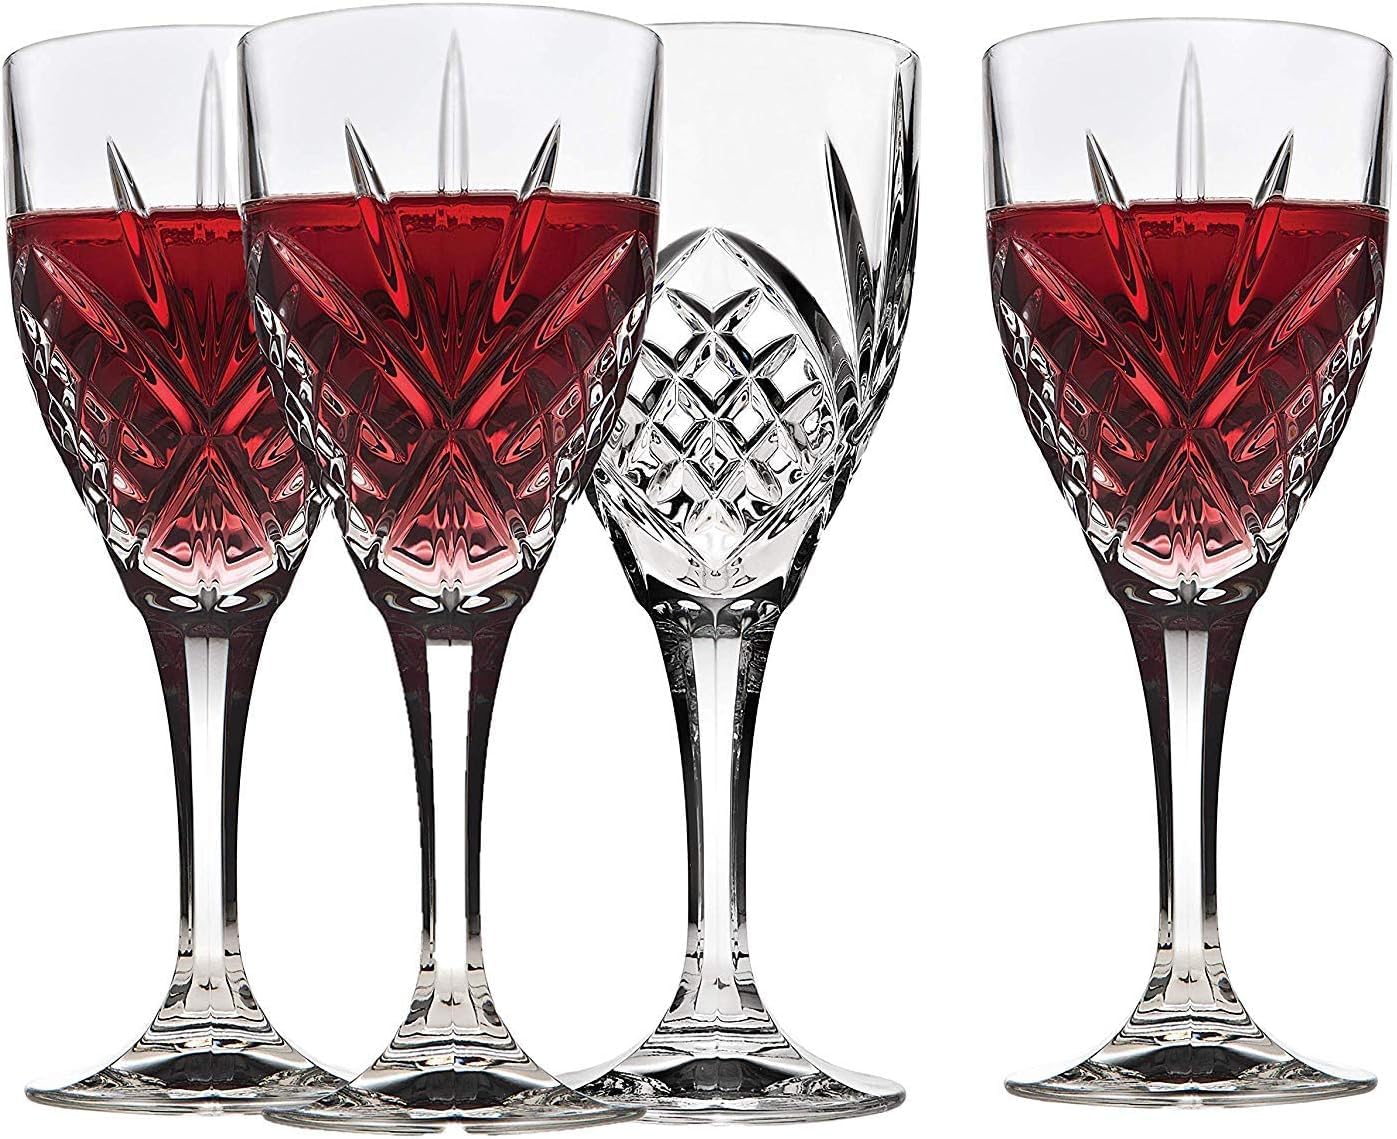 Lefonte Wine Glasses, Stemmed Wine Glasses, Glass Cups with Stem, Red Wine Glasses, Crystal Drinking Glasses, Wine Glass - Set of 4